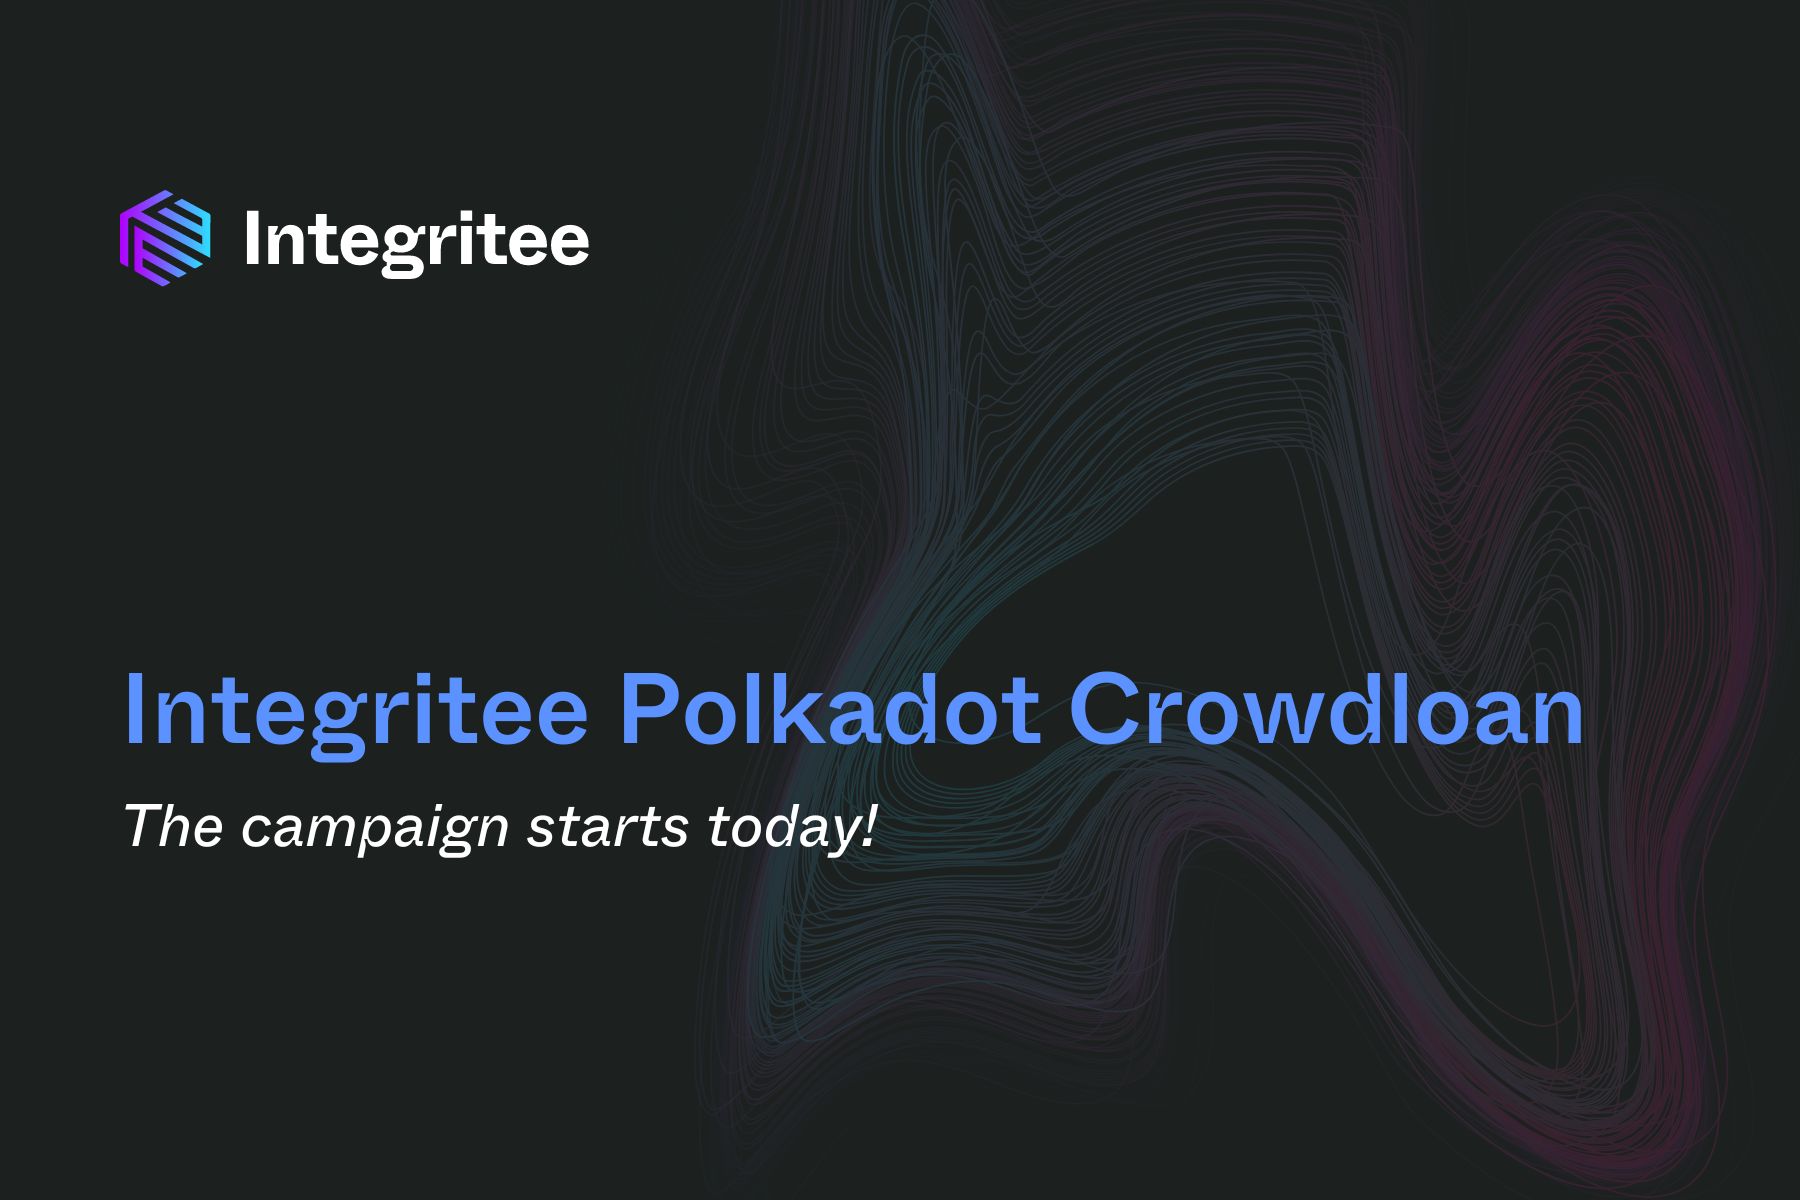 The Integritee Polkadot Crowdloan Campaign Starts Today!